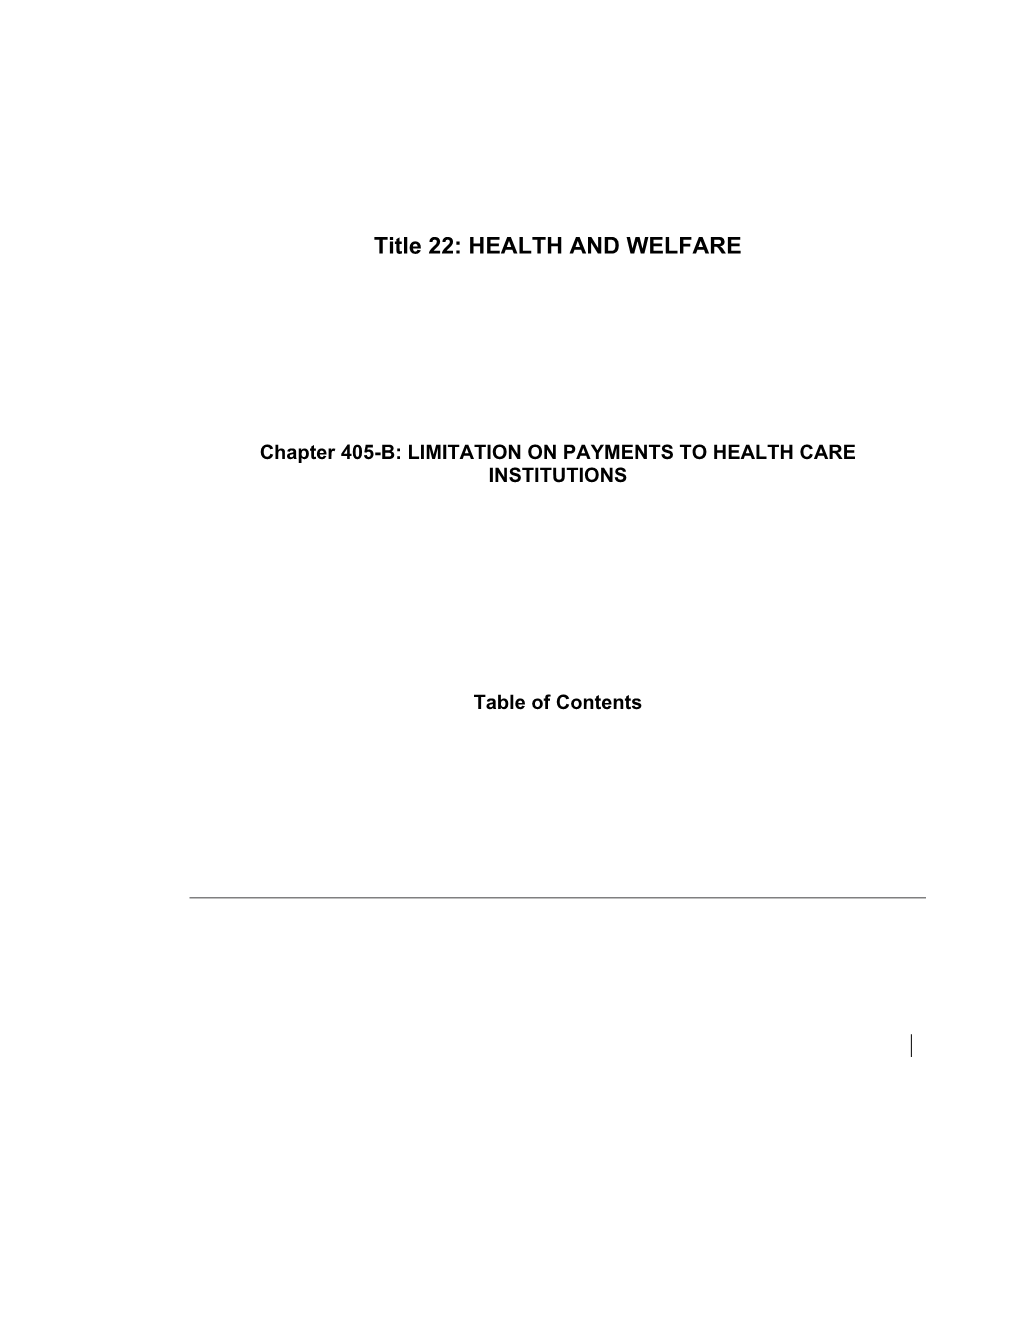 MRS Title 22, Chapter405-B: LIMITATION on PAYMENTS to HEALTH CARE INSTITUTIONS